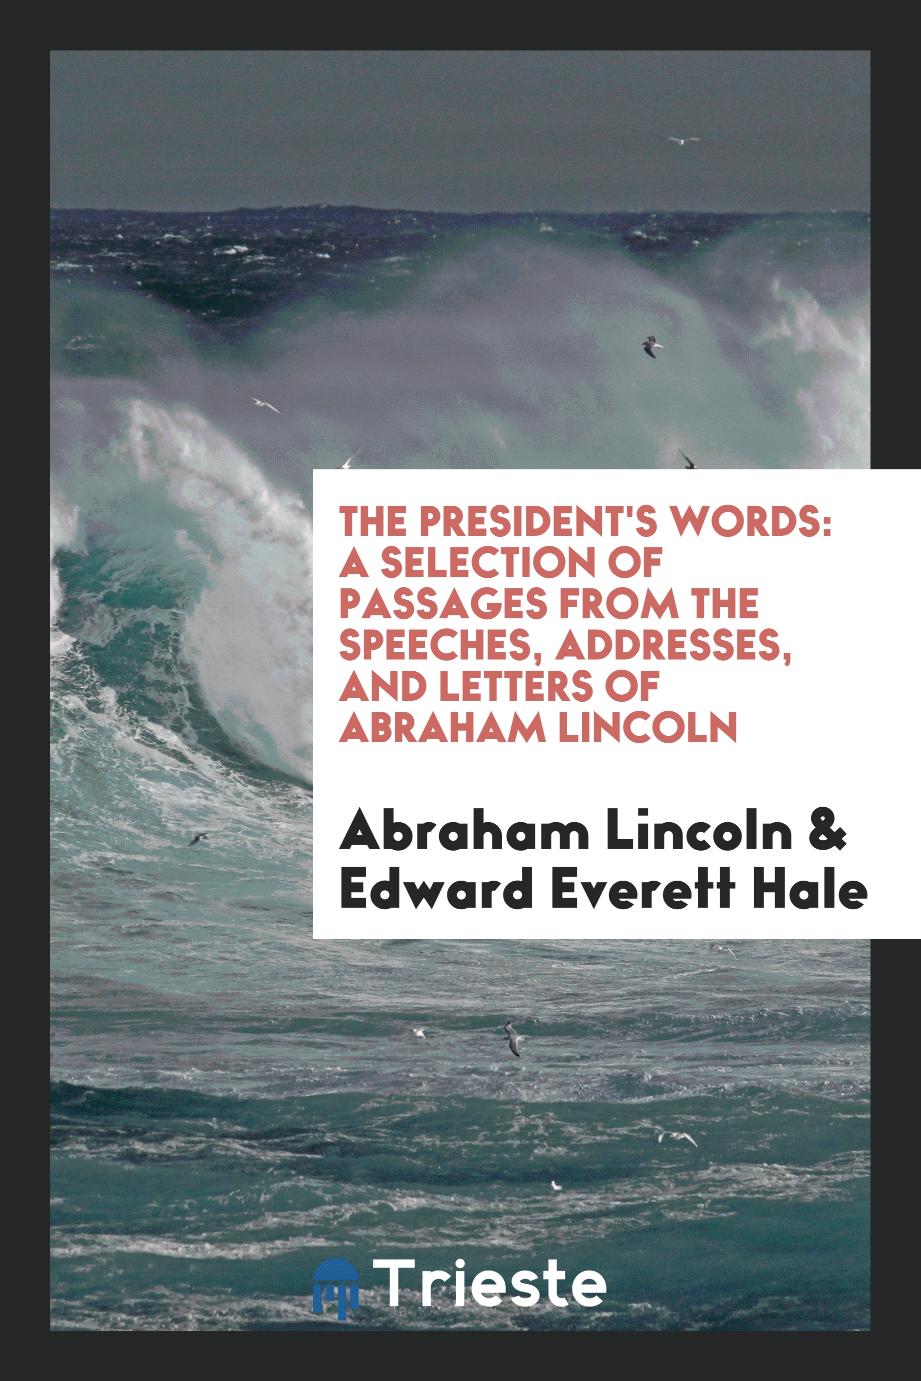 The president's words: a selection of passages from the speeches, addresses, and letters of Abraham Lincoln